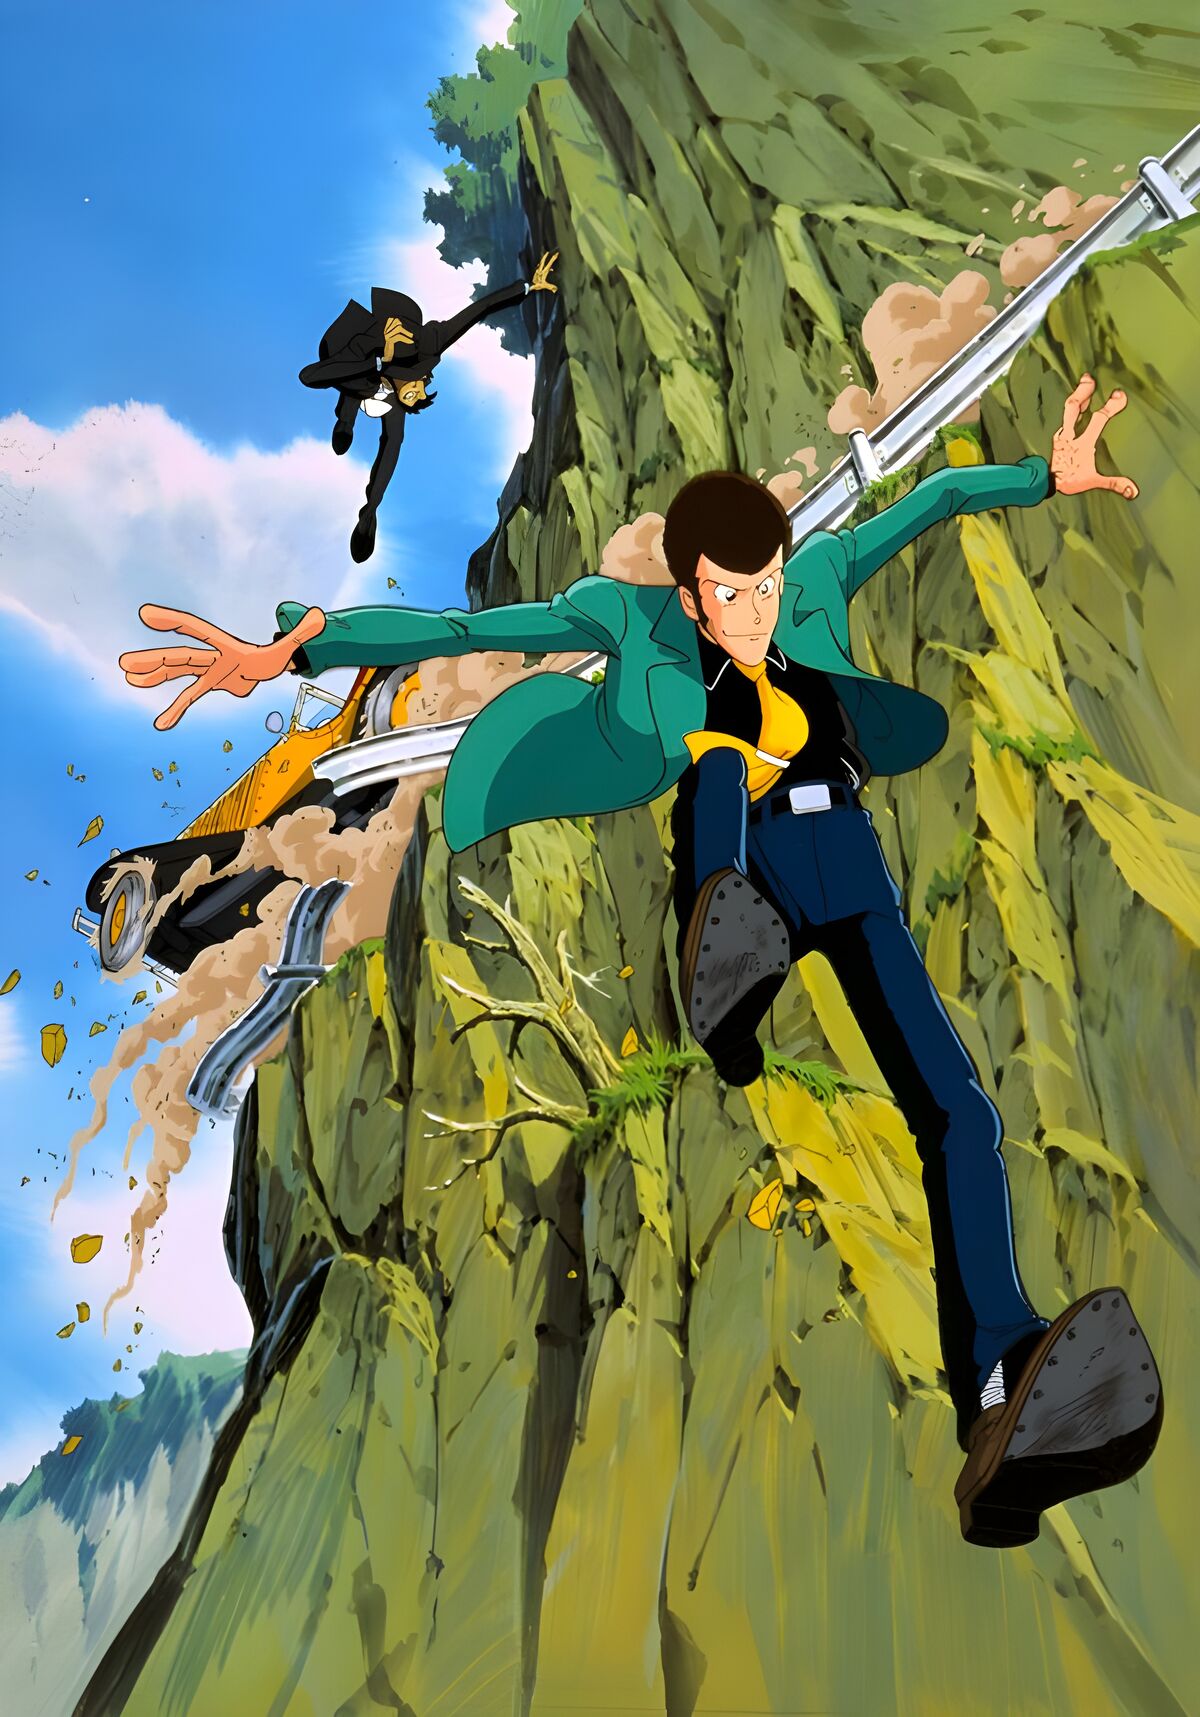 Lupin the 3rd: Prison of the Past - Apple TV